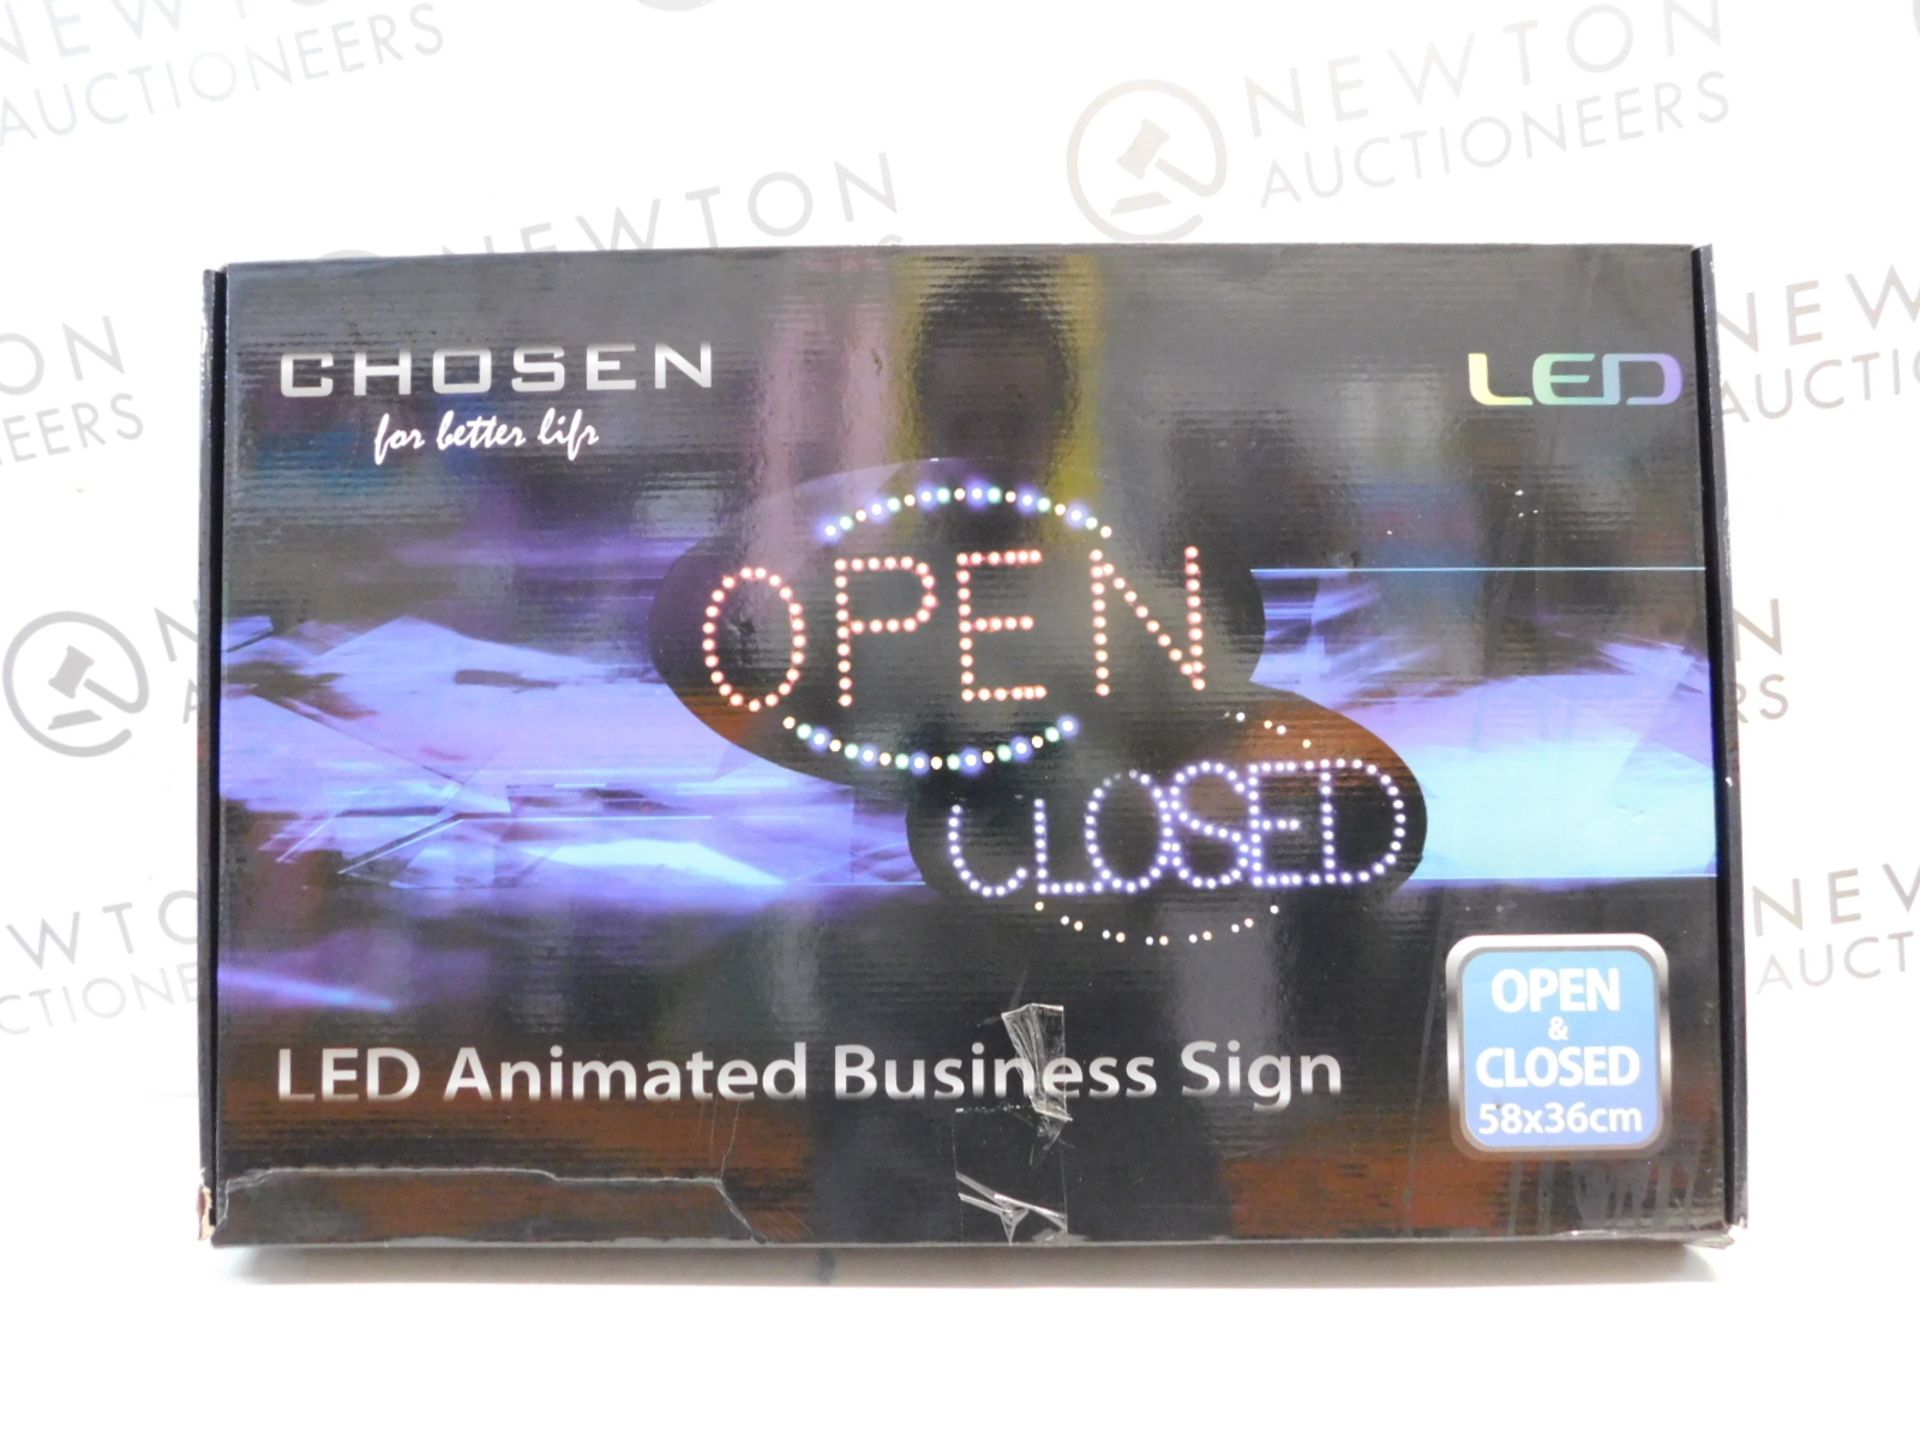 1 BOXED LED ANIMATED BUSINESS SIGN RRP £39.99